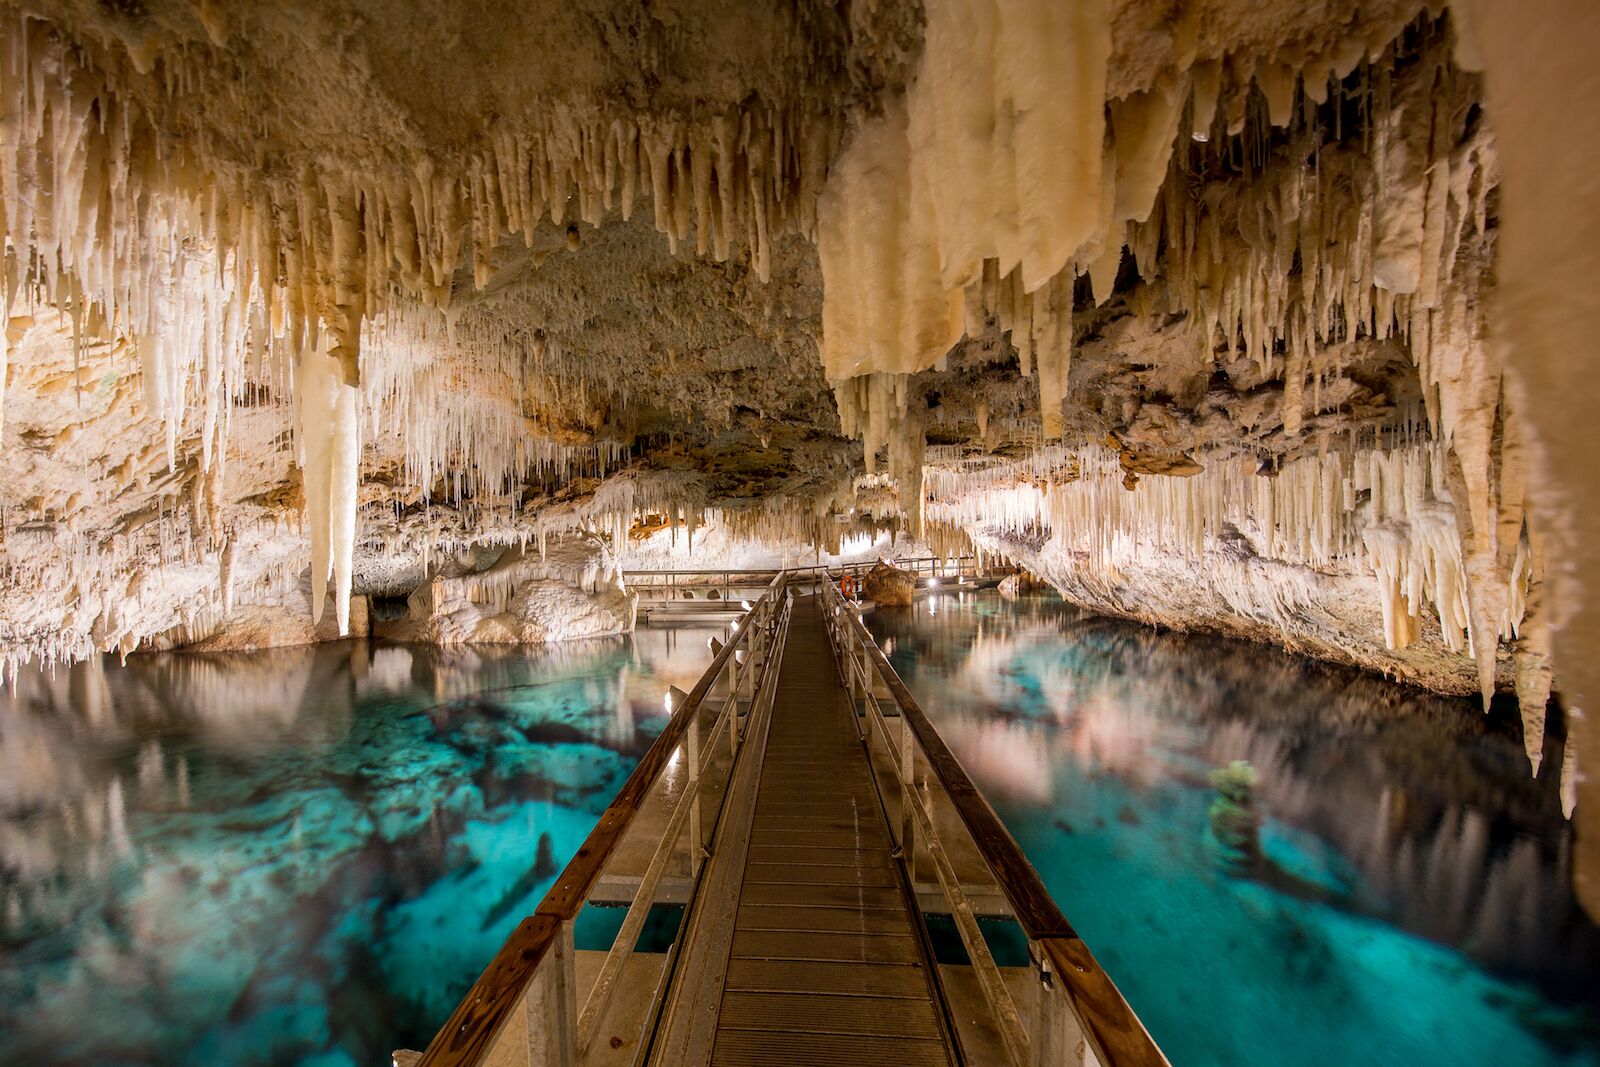 Bermuda caves - most famous is crystal cave, shown here 